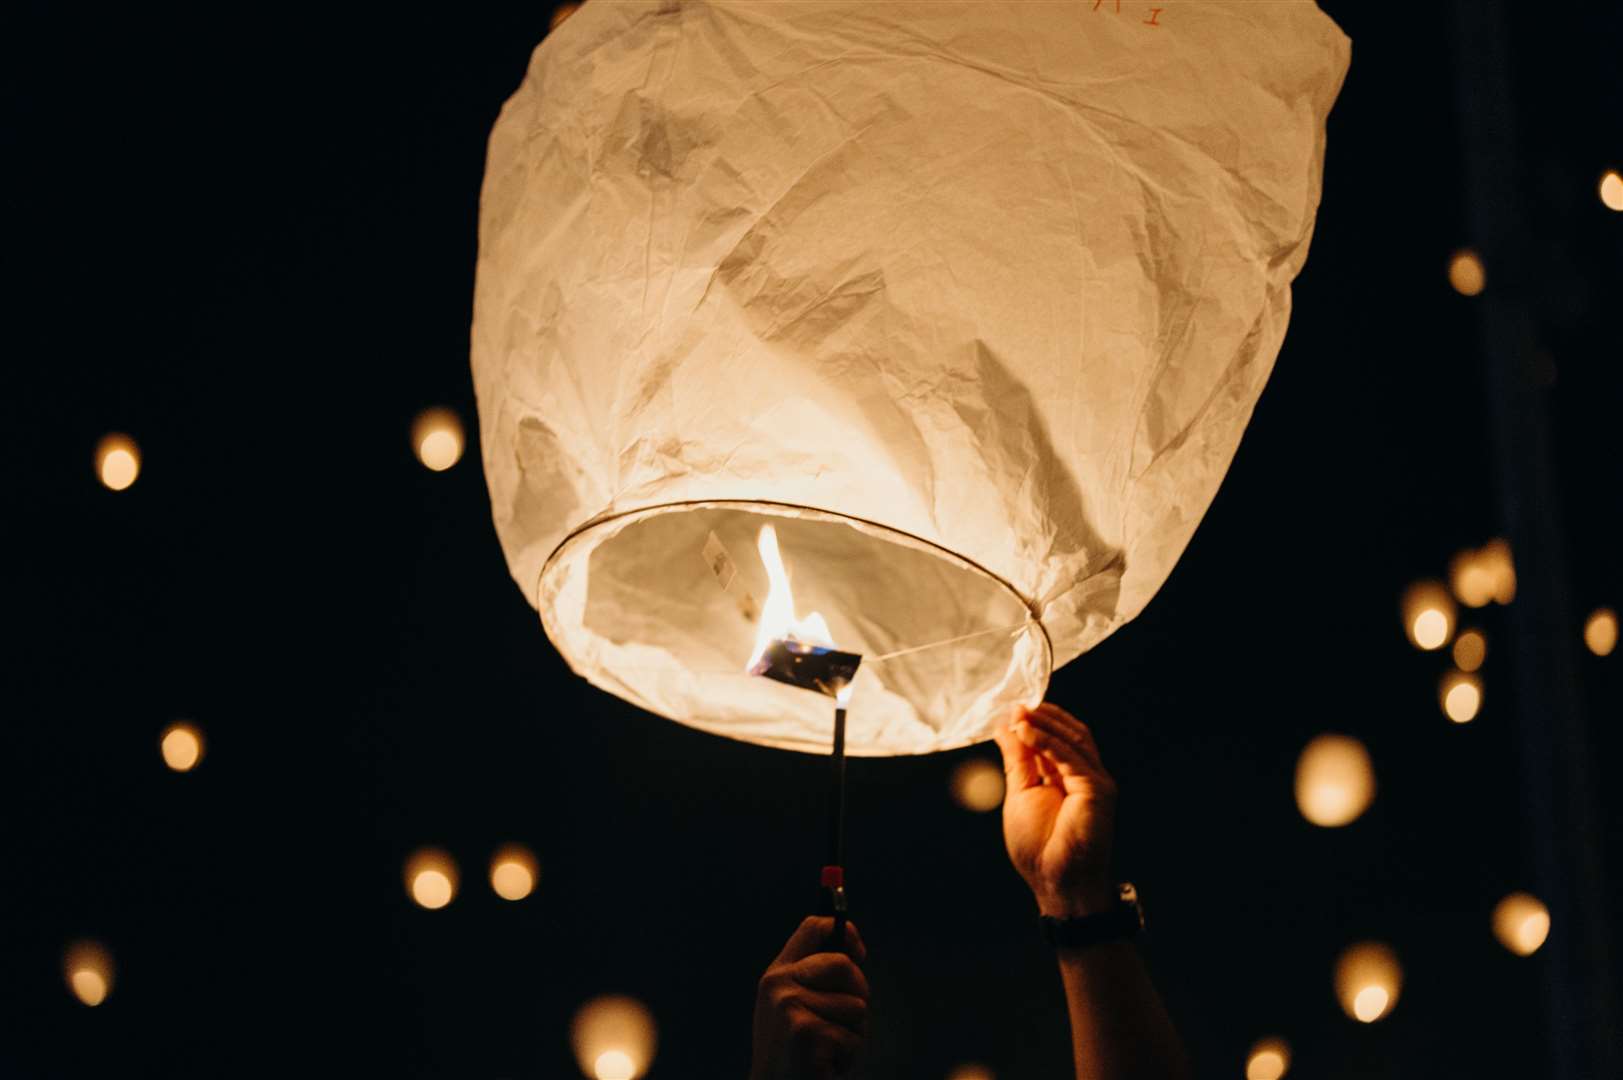 Sky lanterns are banned across much of Kent